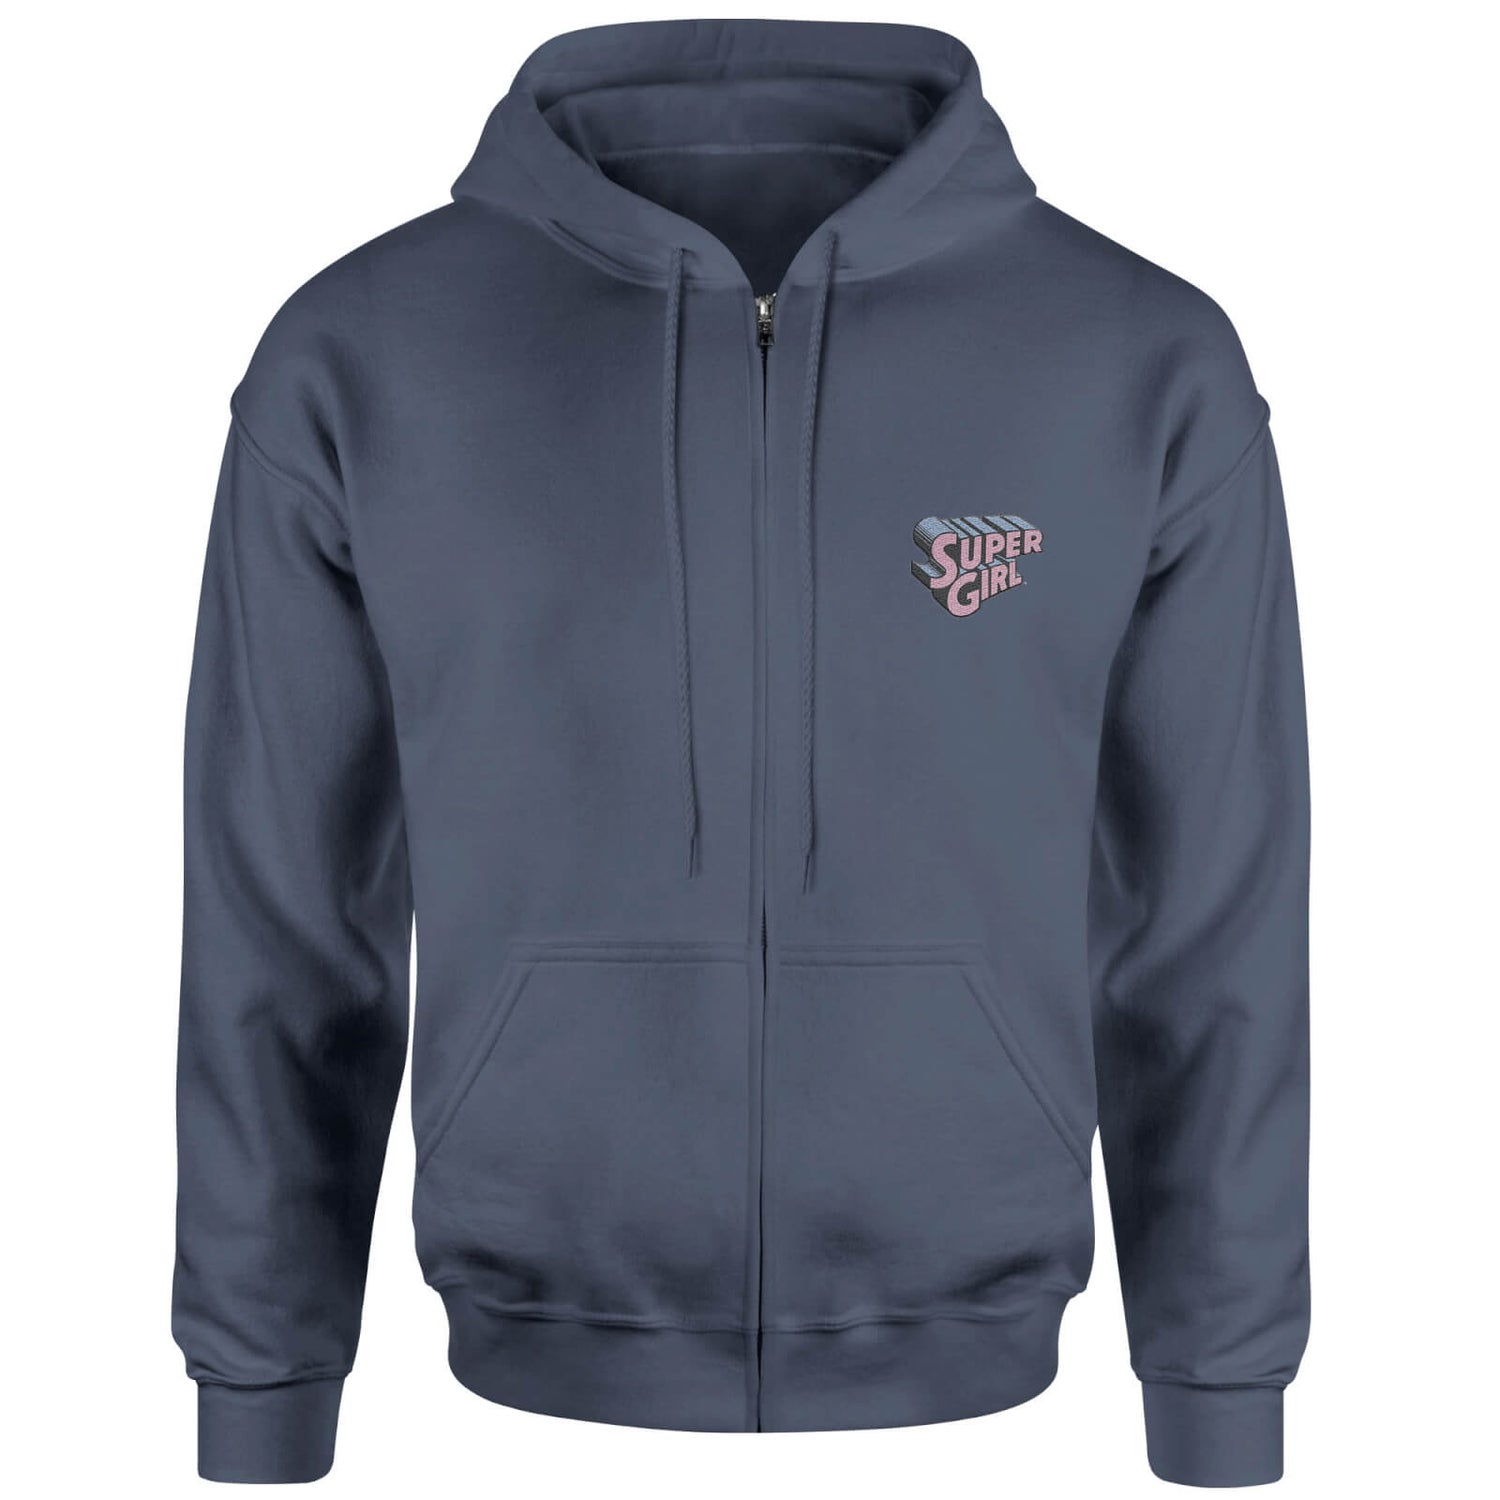 Supergirl Embroidered Unisex Zipped Hoodie - Navy